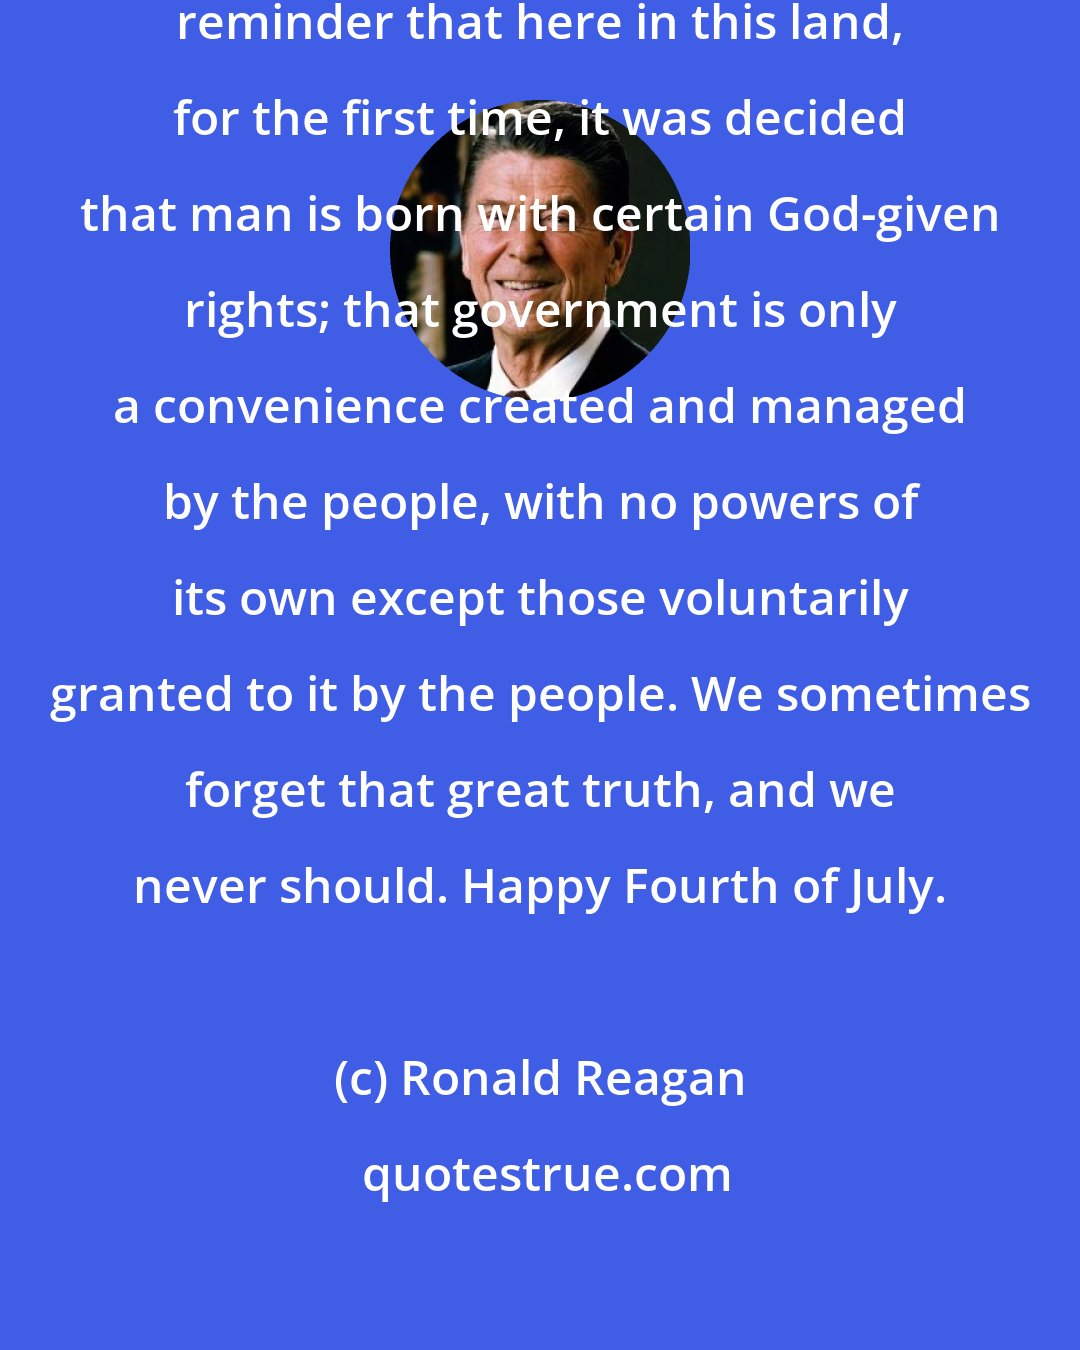 Ronald Reagan: Let the Fourth of July always be a reminder that here in this land, for the first time, it was decided that man is born with certain God-given rights; that government is only a convenience created and managed by the people, with no powers of its own except those voluntarily granted to it by the people. We sometimes forget that great truth, and we never should. Happy Fourth of July.